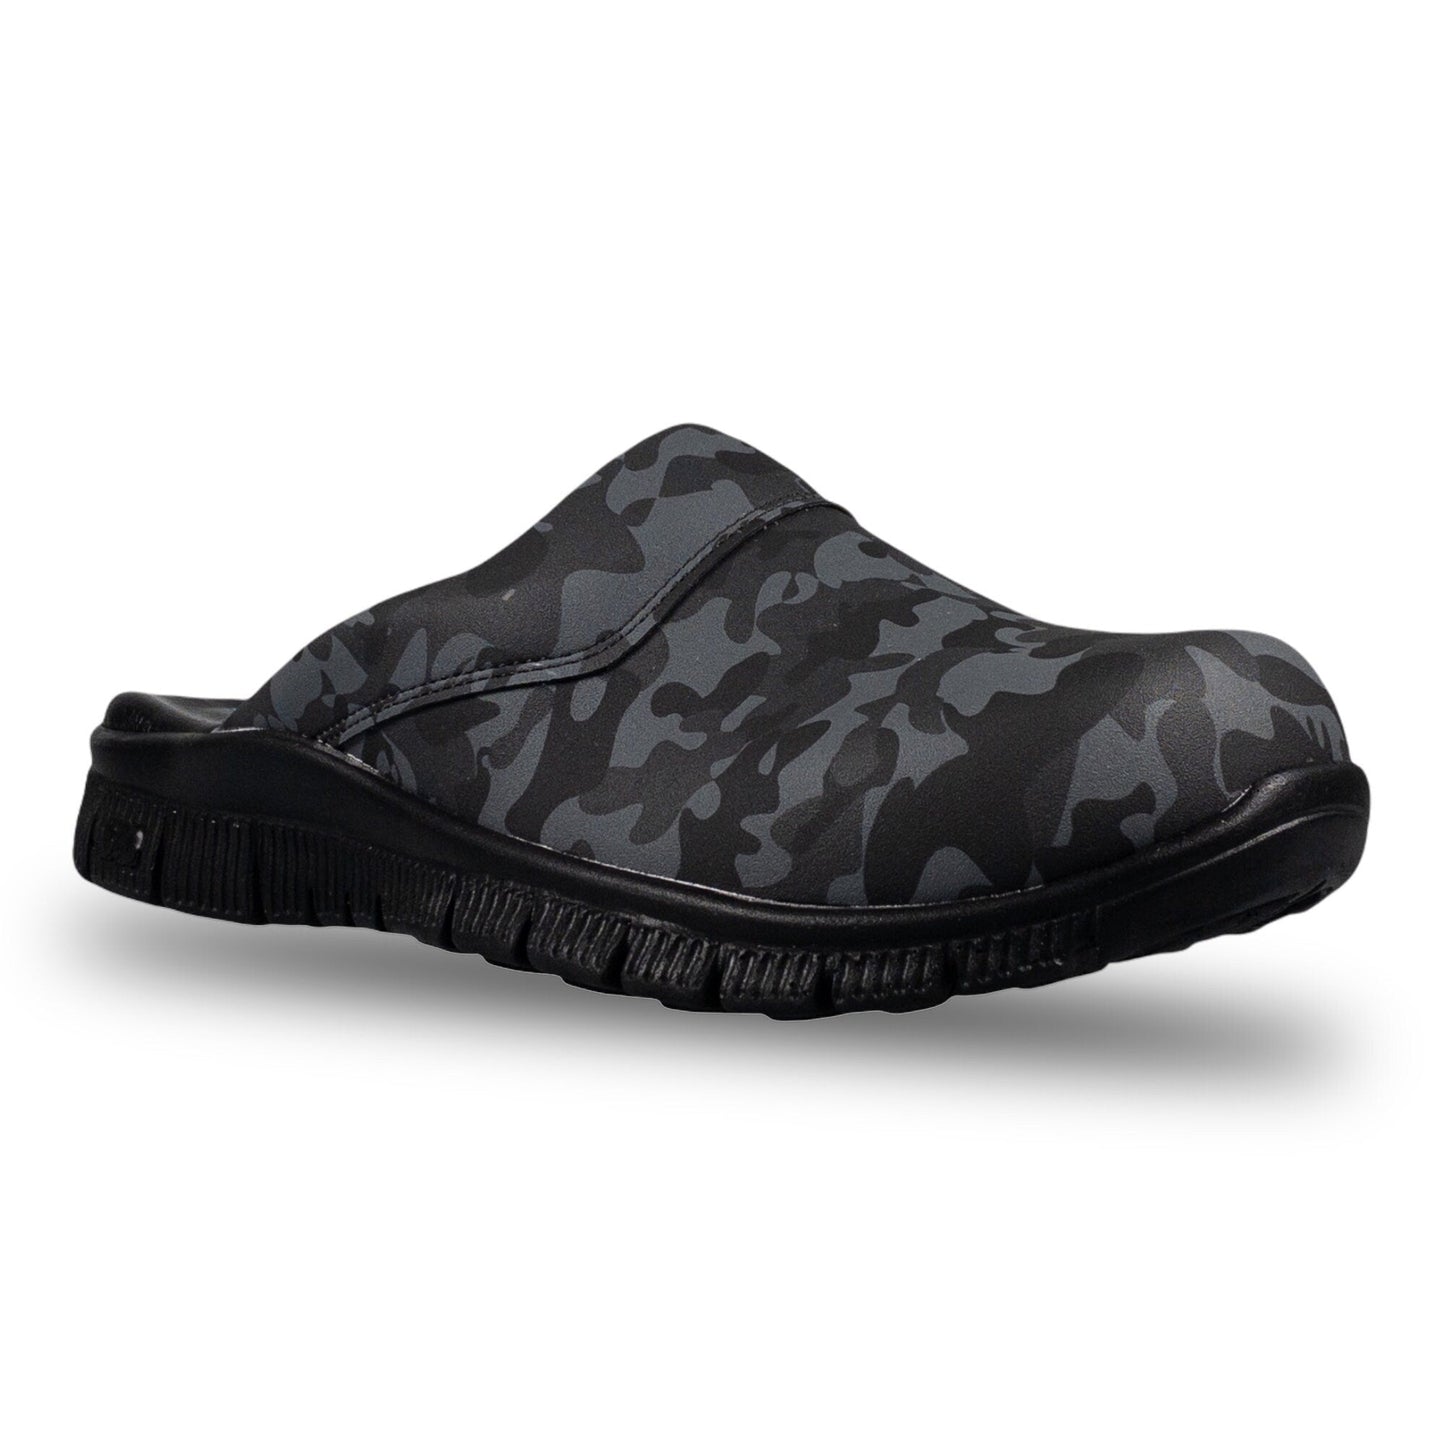 Camouflage Comfortflex Leather Clogs Slippers